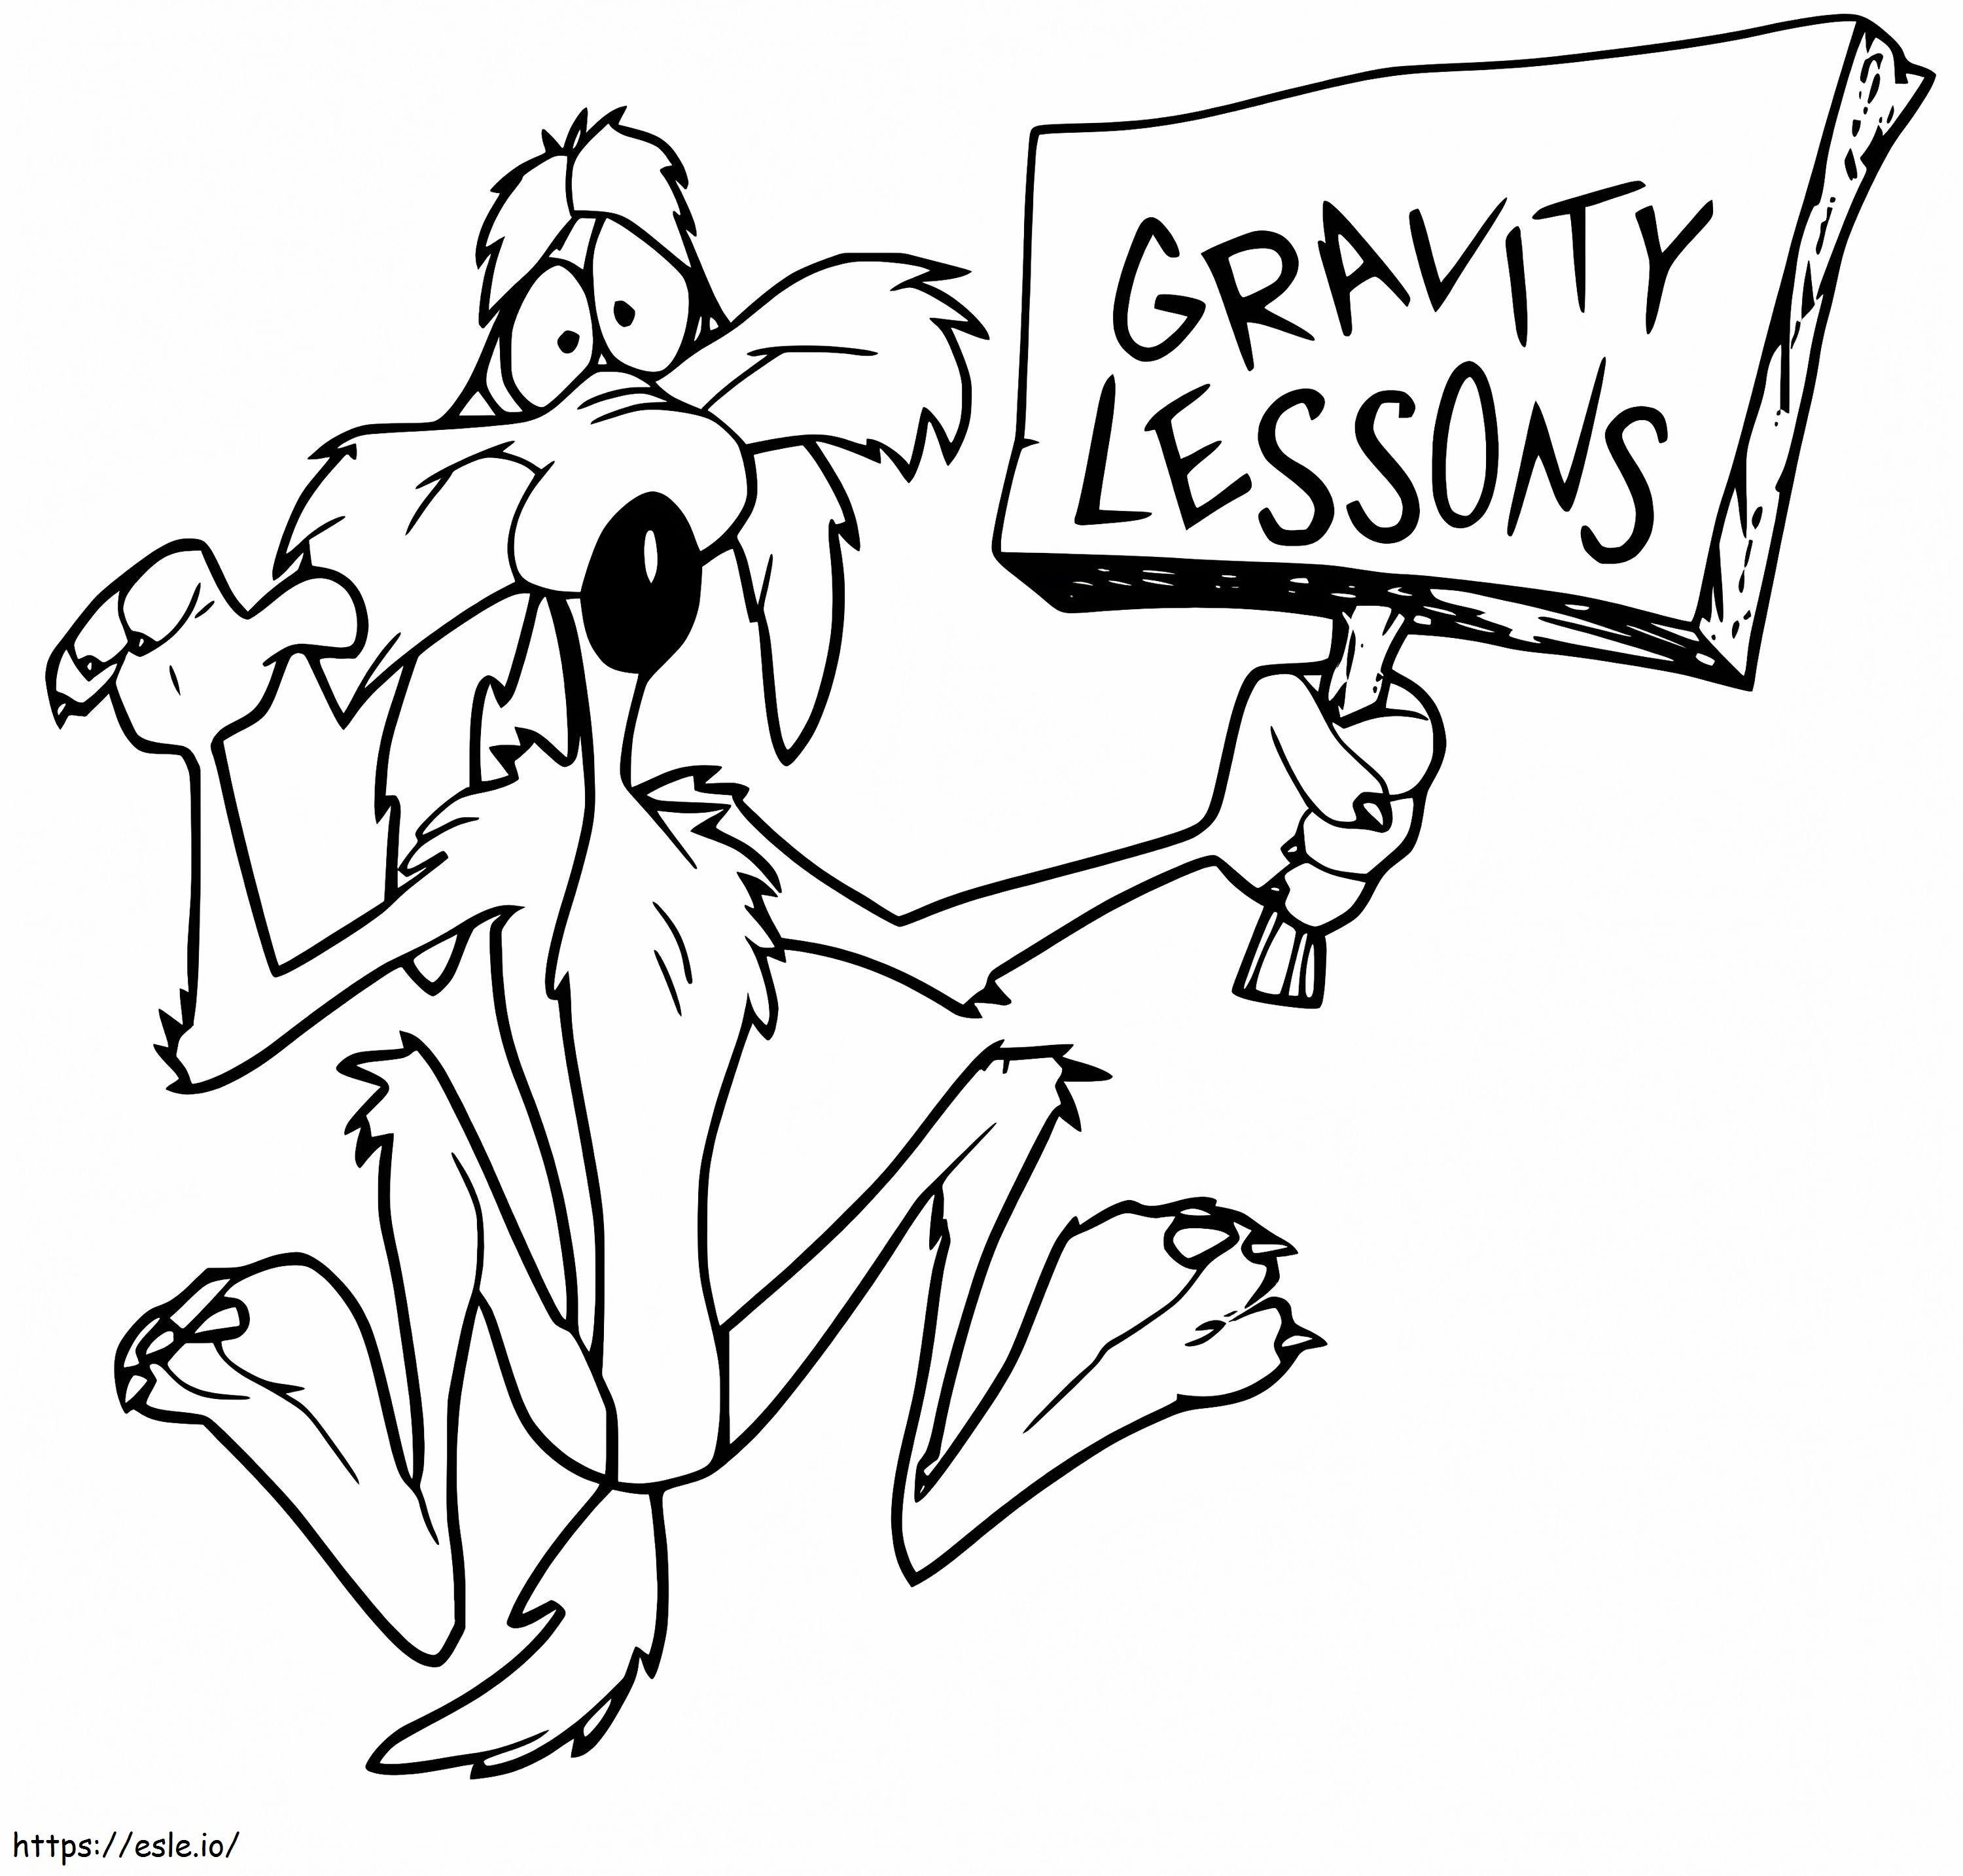 Wile E Coyote Falling coloring page